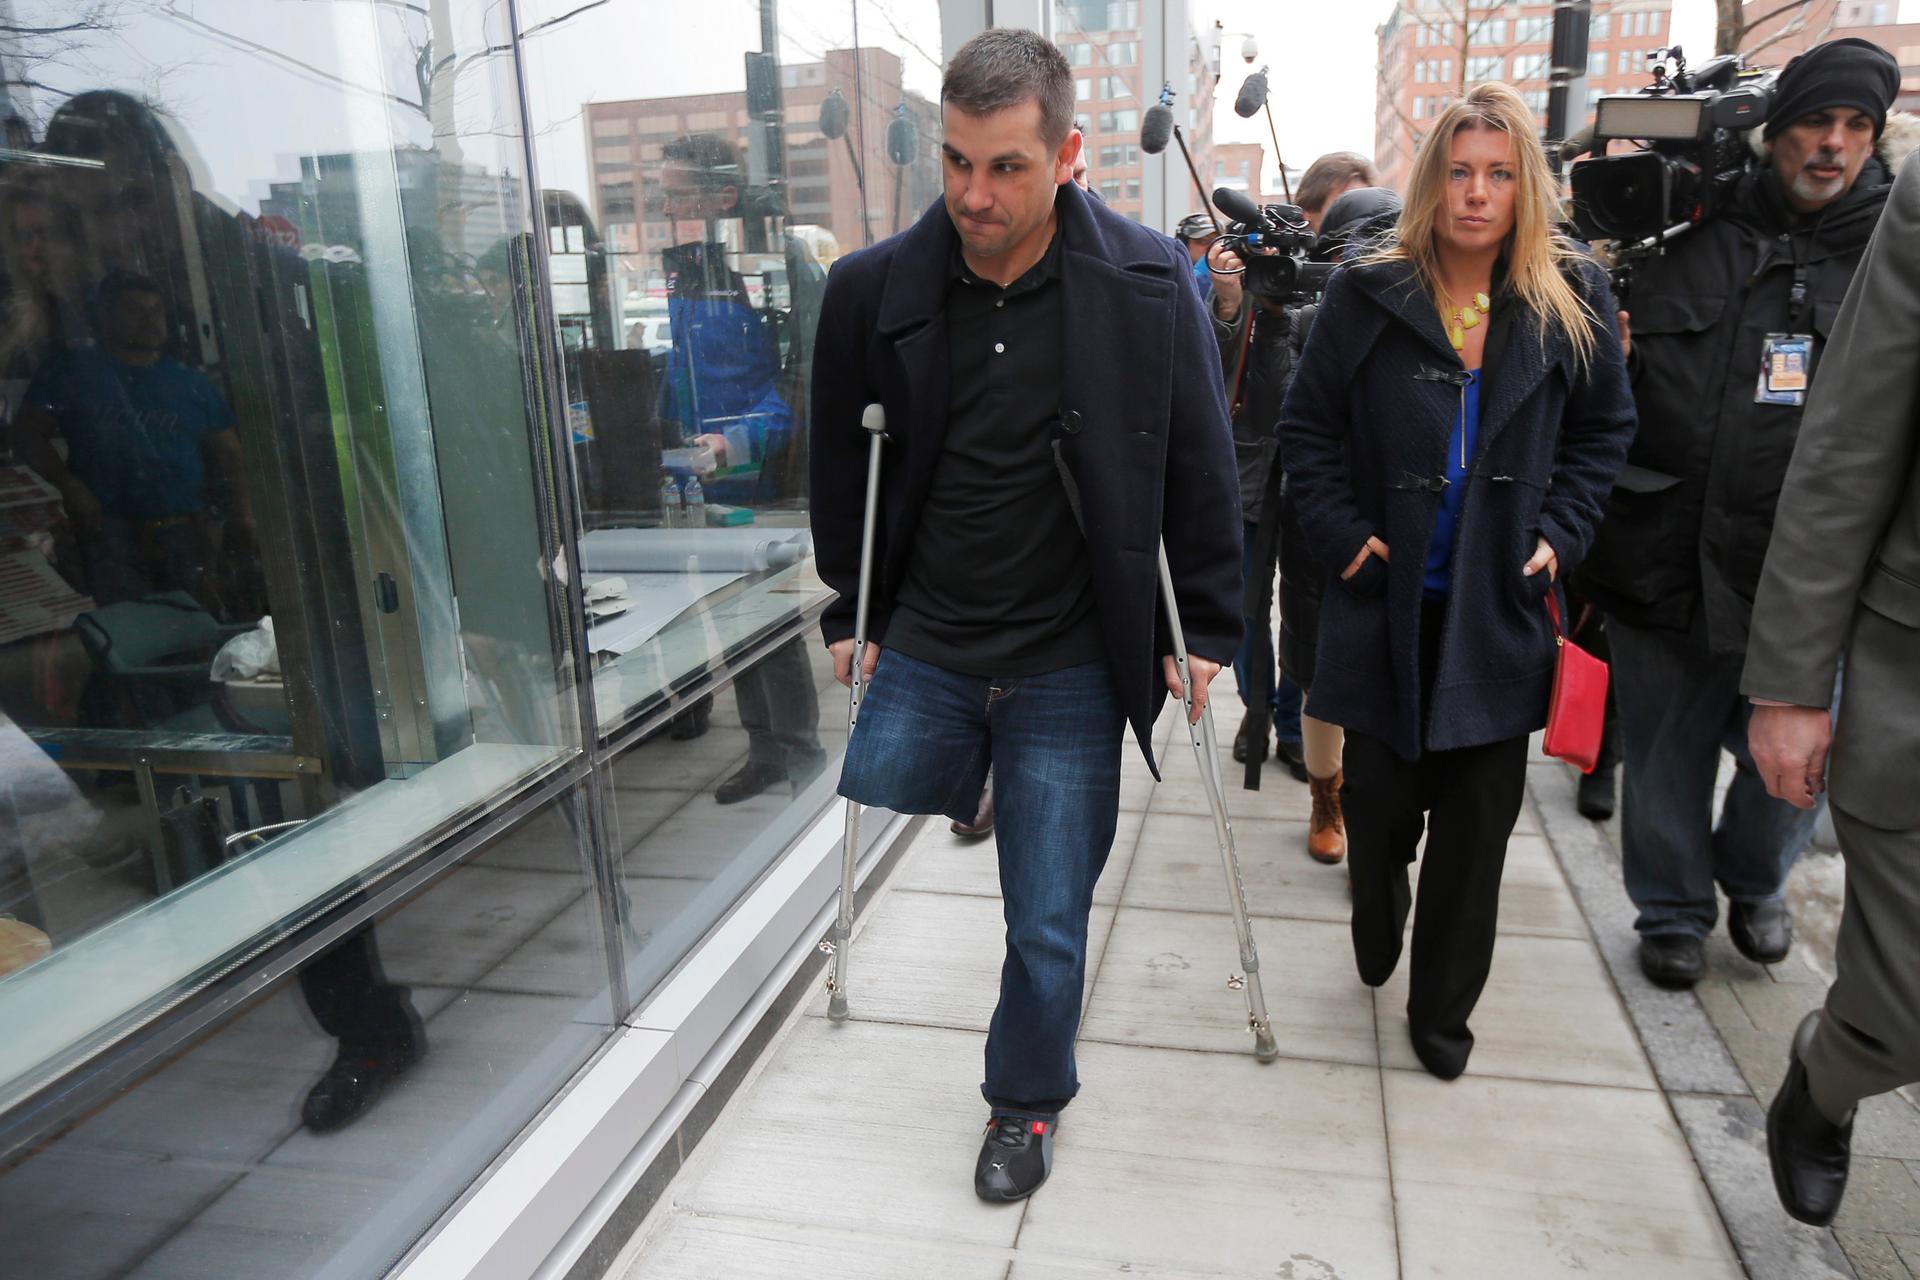 Boston Marathon bombing survivor Marc Fucarile leaves the federal courthouse in Boston on the first day of the trial of accused Boston Marathon bomber Dzhokhar Tsarnaev on March 4, 2015.